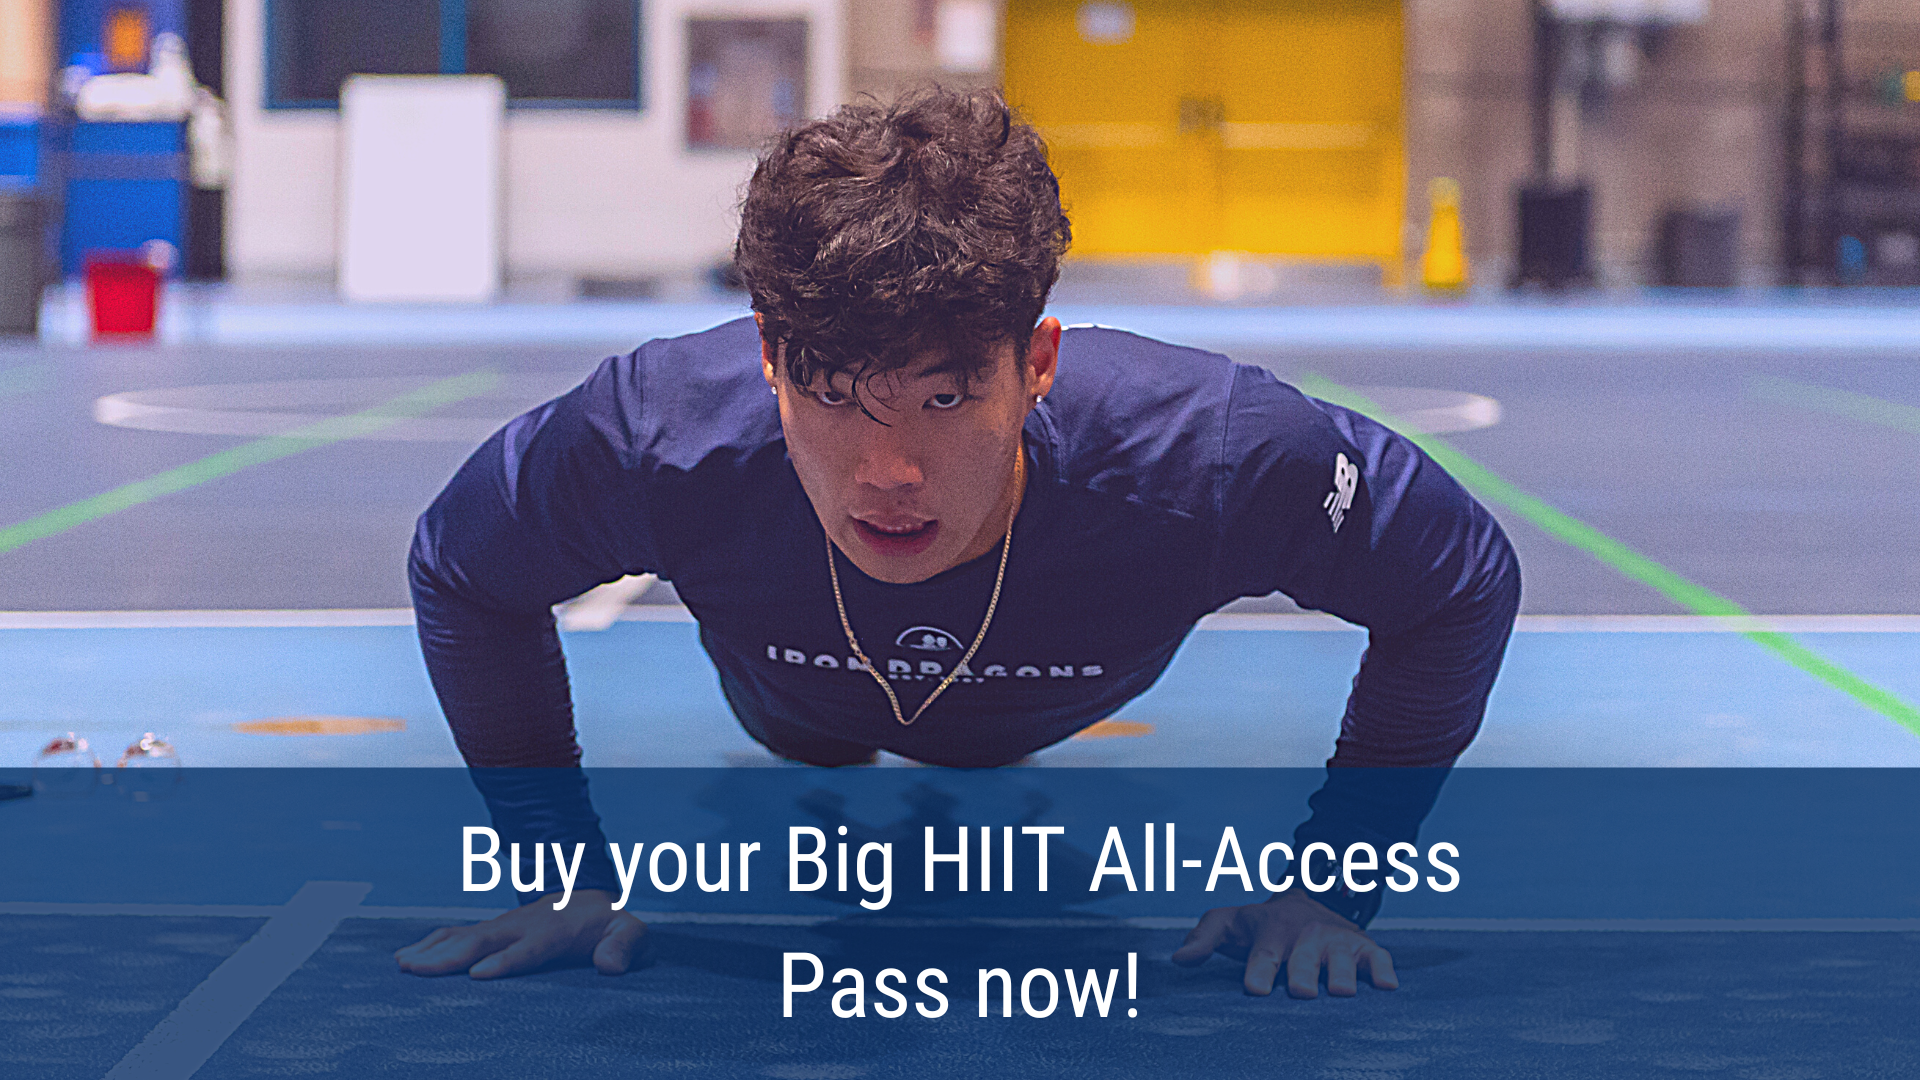 graphic advertising Big HIIT All-Access Pass